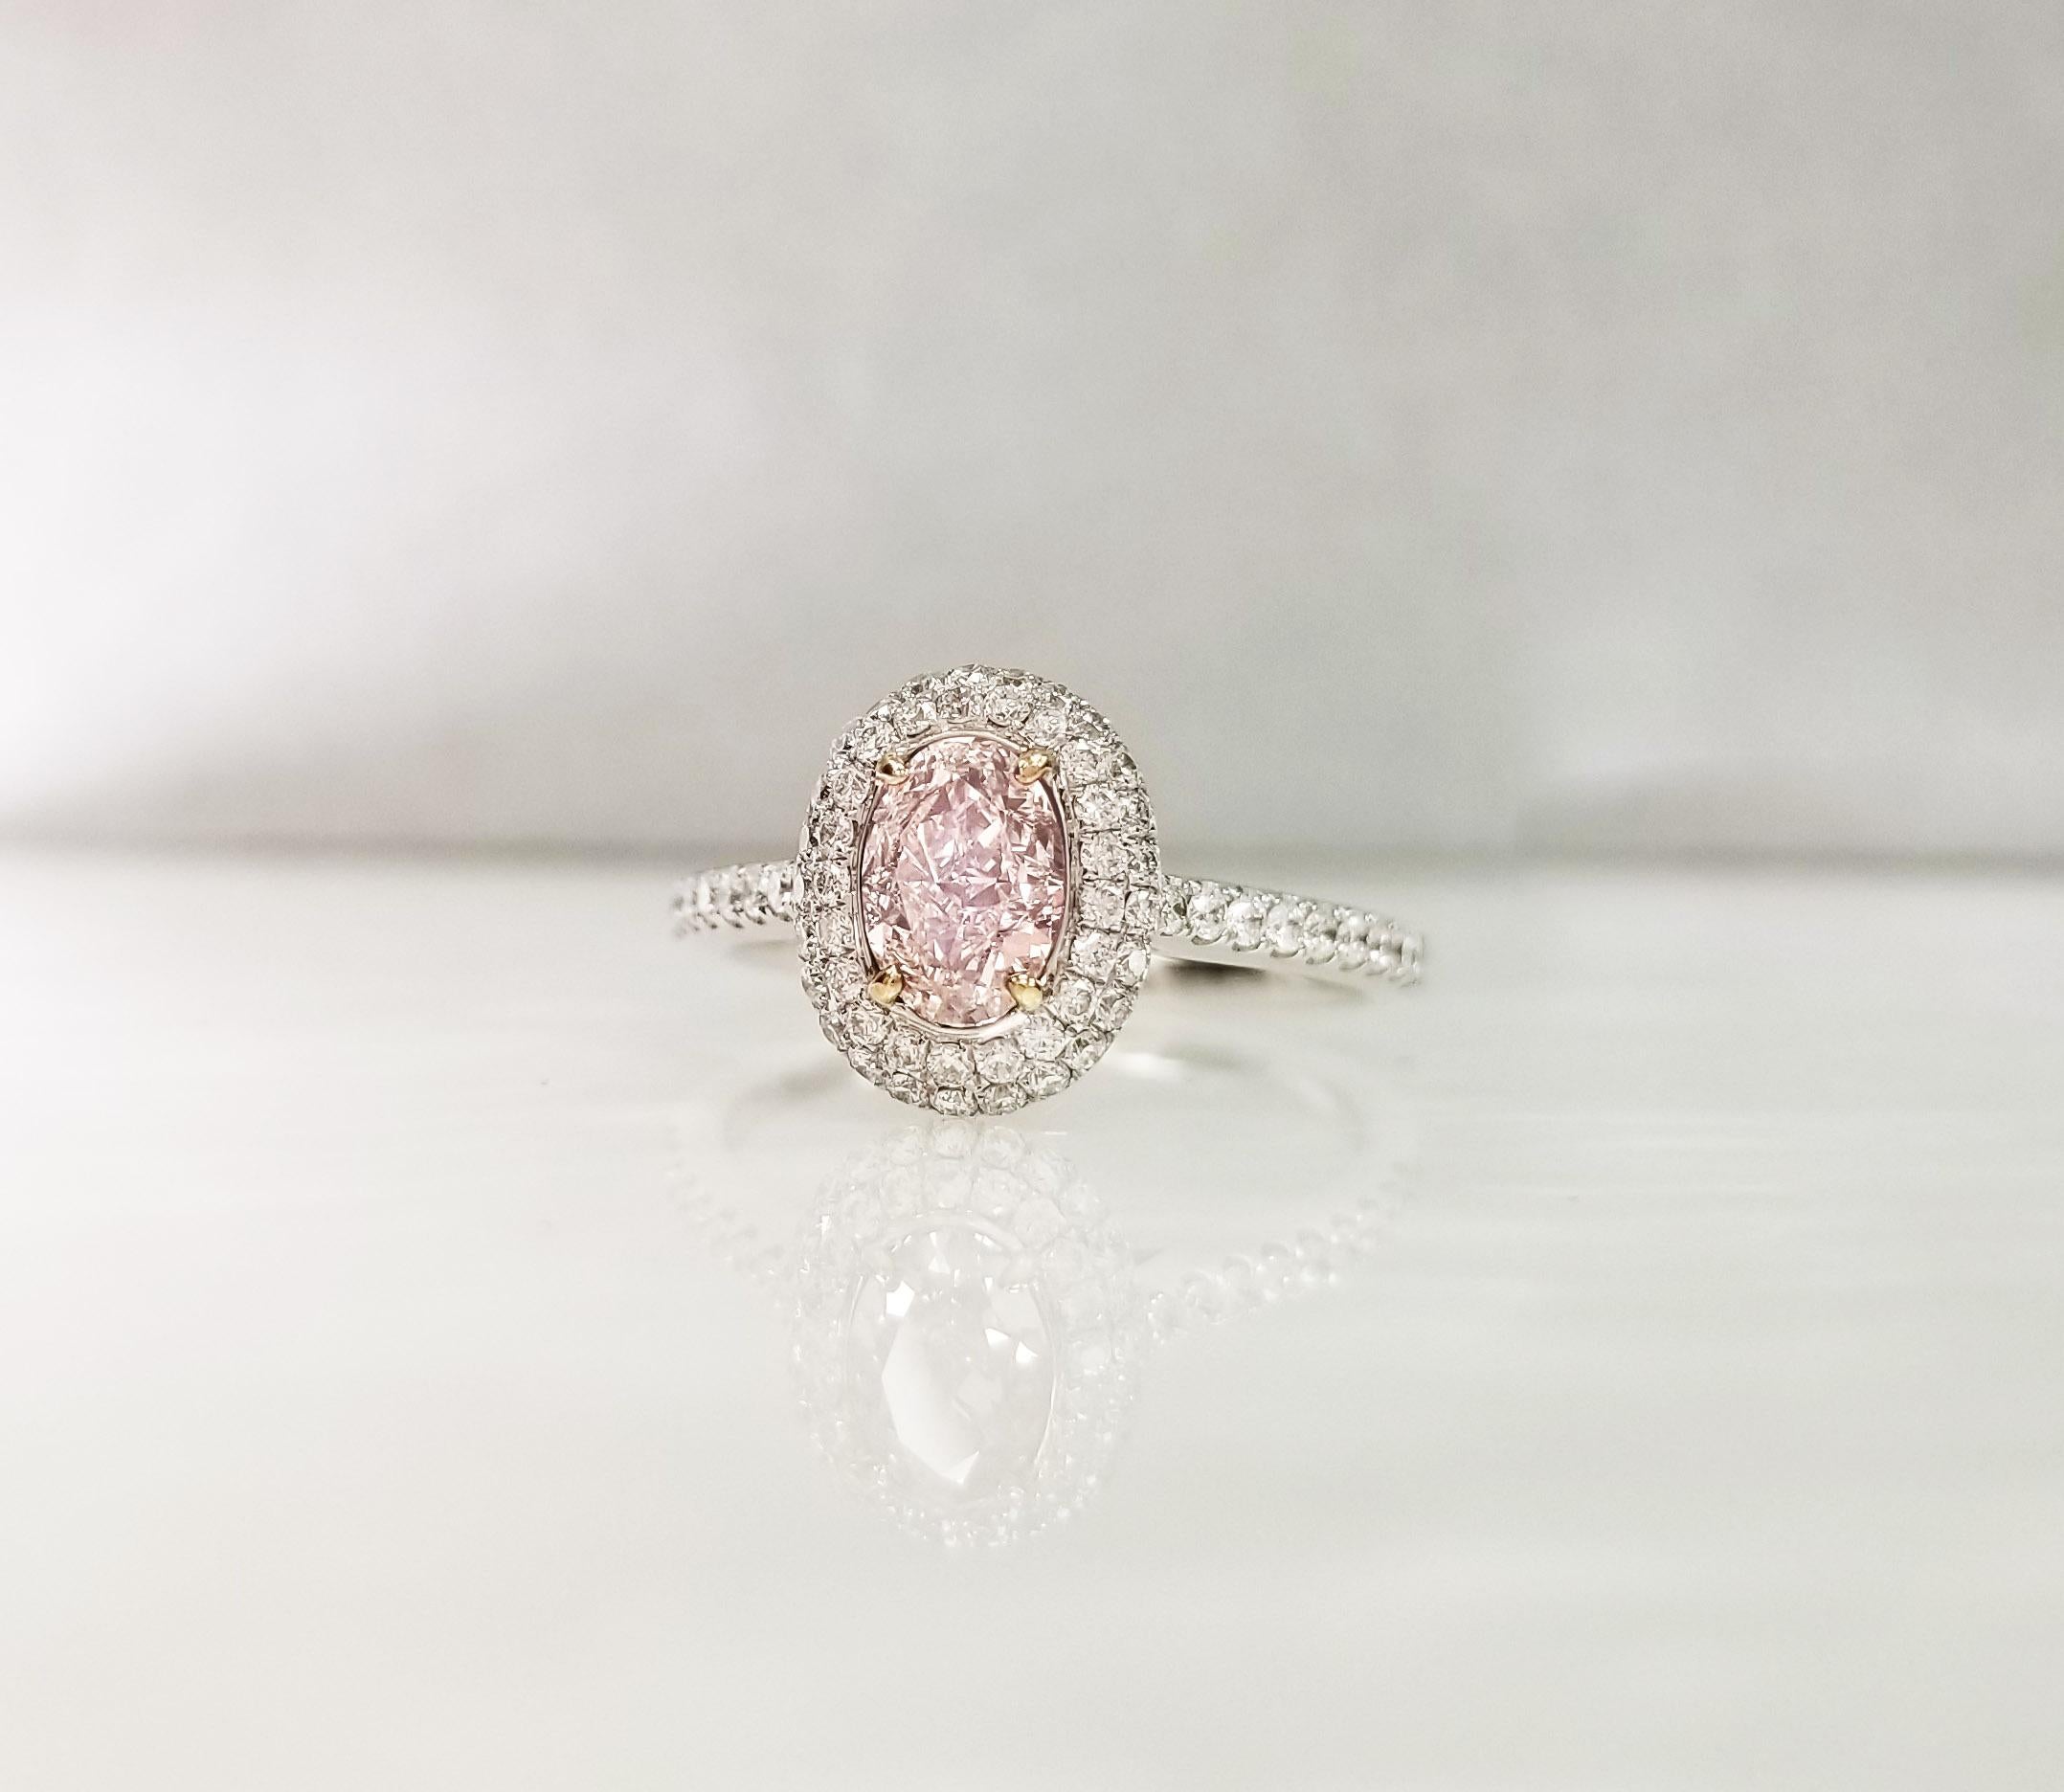 GIA-Certified 0.82 ct Oval Pink Diamond Engagement Halo Ring on 18k White Gold band. The central Pink Diamond with VVS1 clarity is surrounded by two rows of white round diamonds to create a “halo” effect. Ring is resizable upon request.

Featuring a